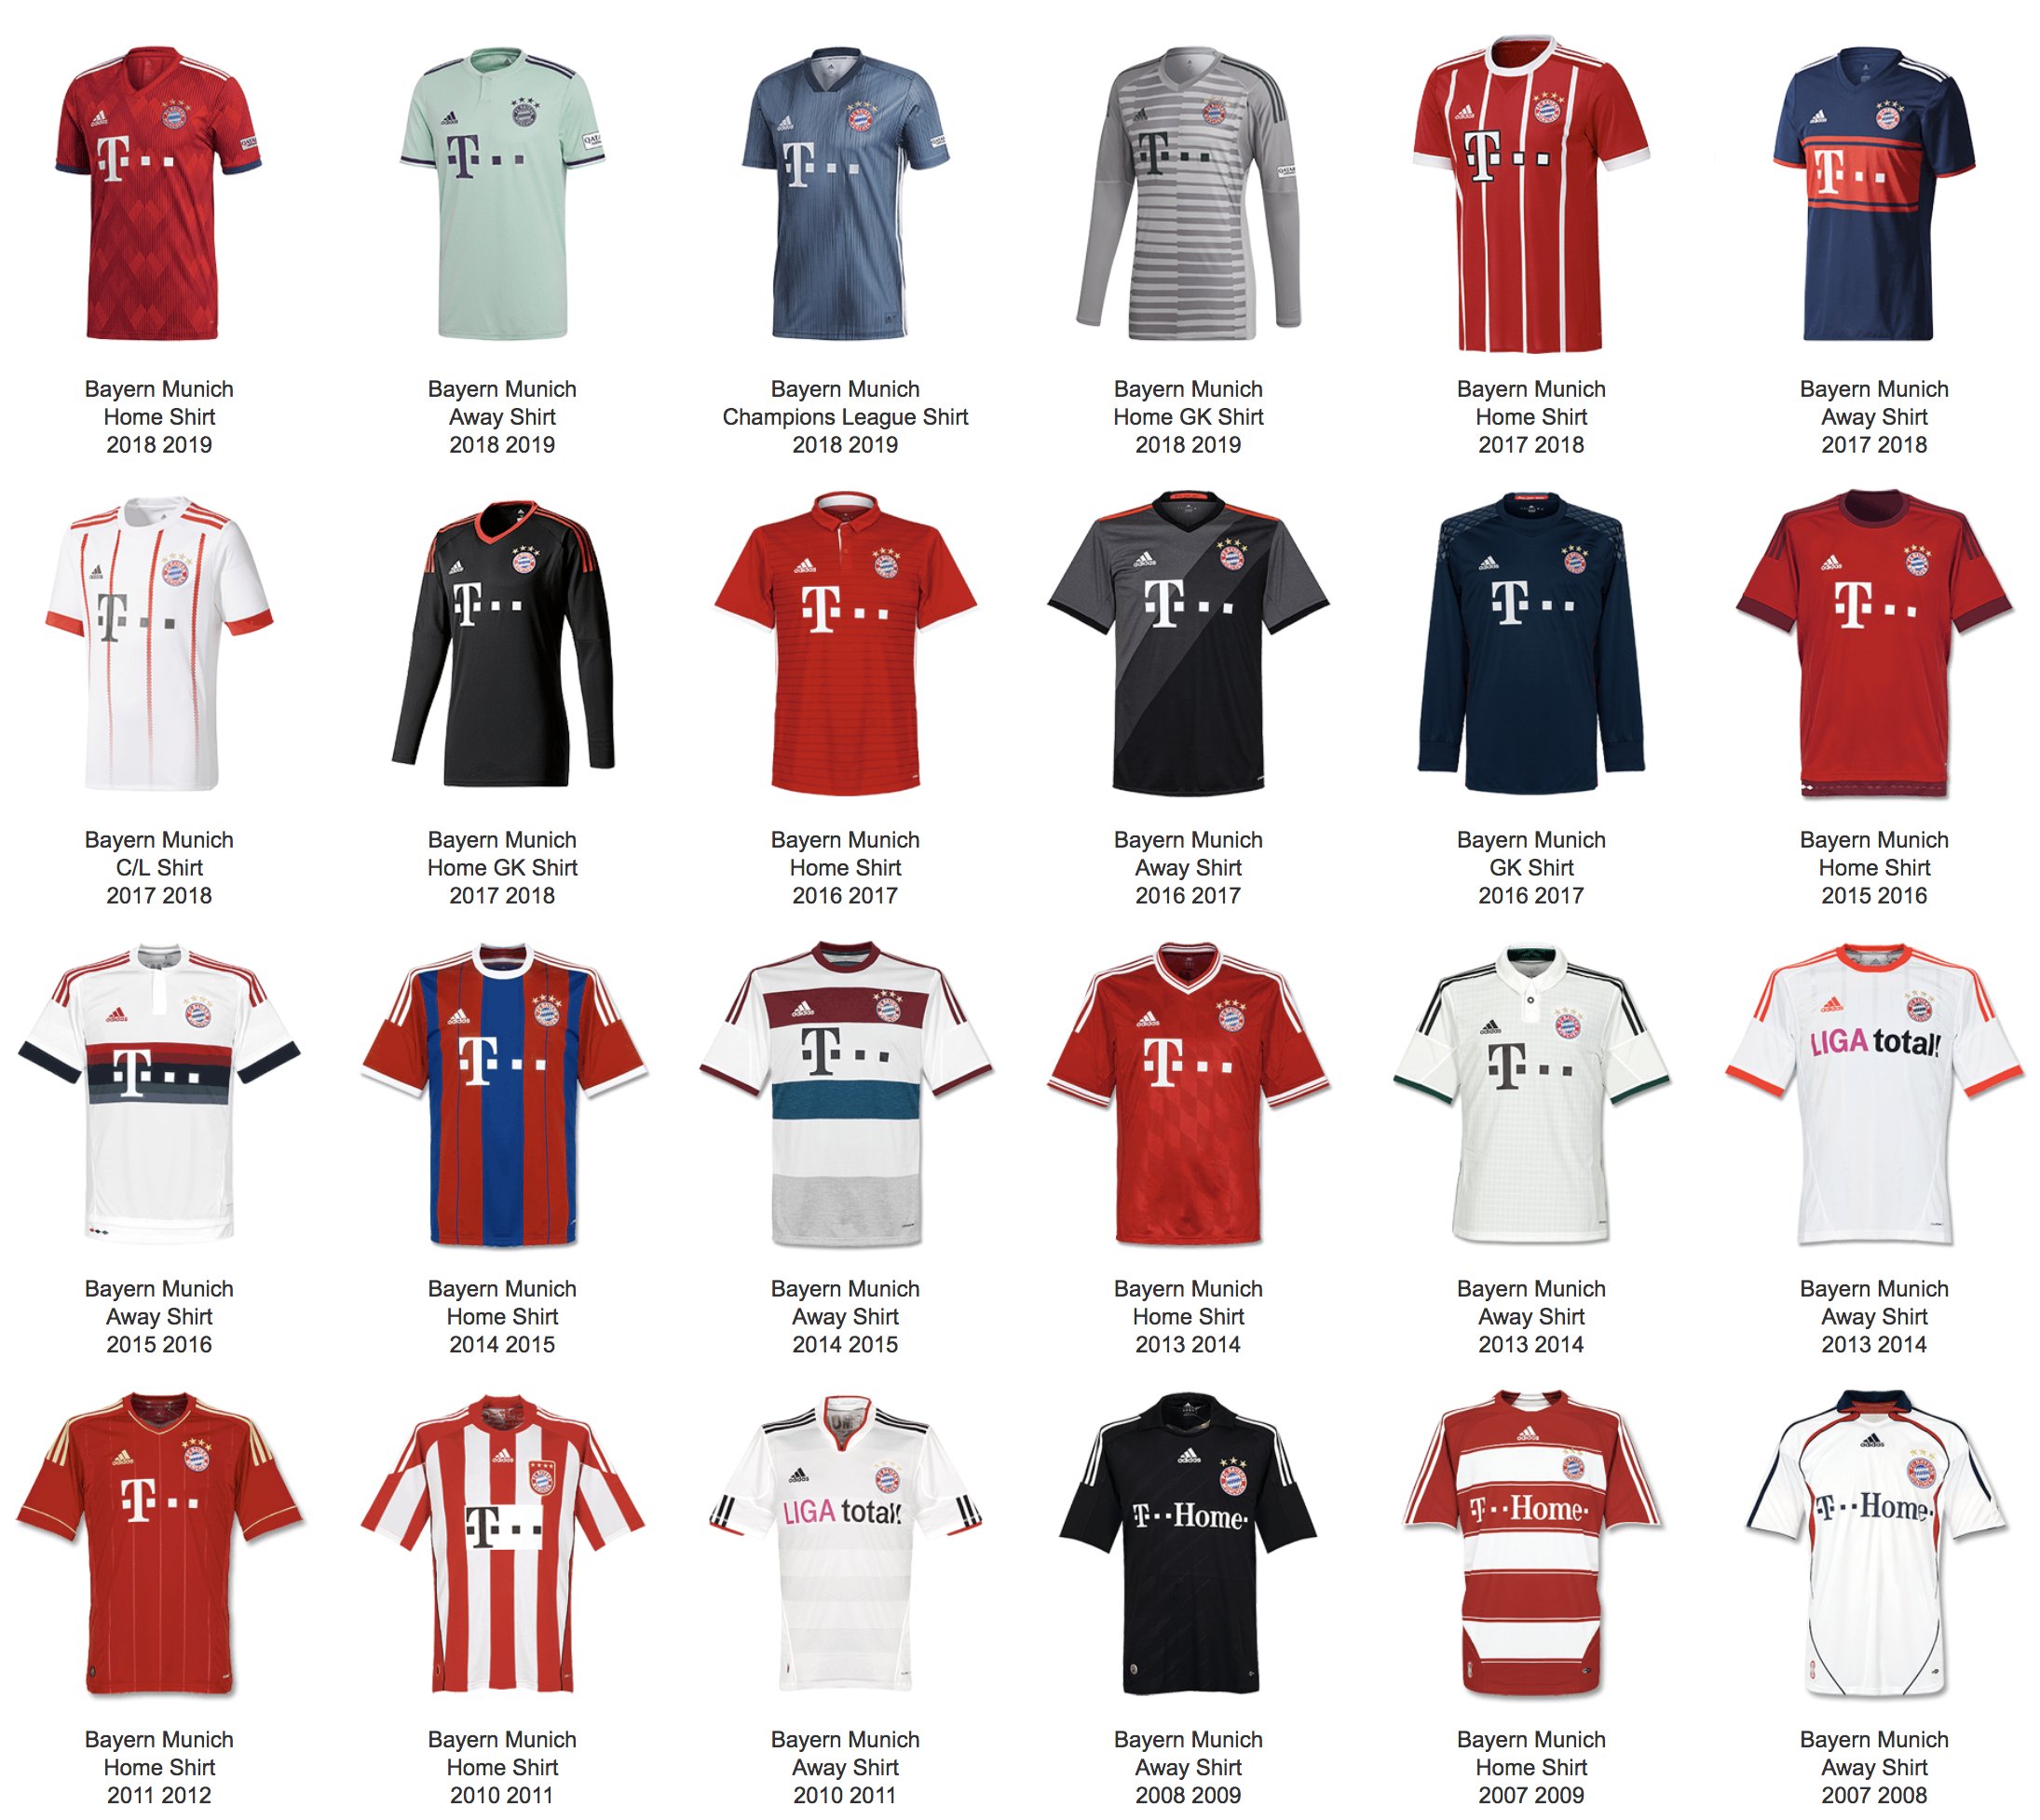 mond Uitsteken band 🇺🇸 FC Bayern US 🇨🇦 al Twitter: "We've had some great kits over the  years, which one is your favorite? 🔥👕🔴⚪️ #FCBayern #MiaSanMia  #FlashbackFriday https://t.co/q34QT66gmB" / Twitter